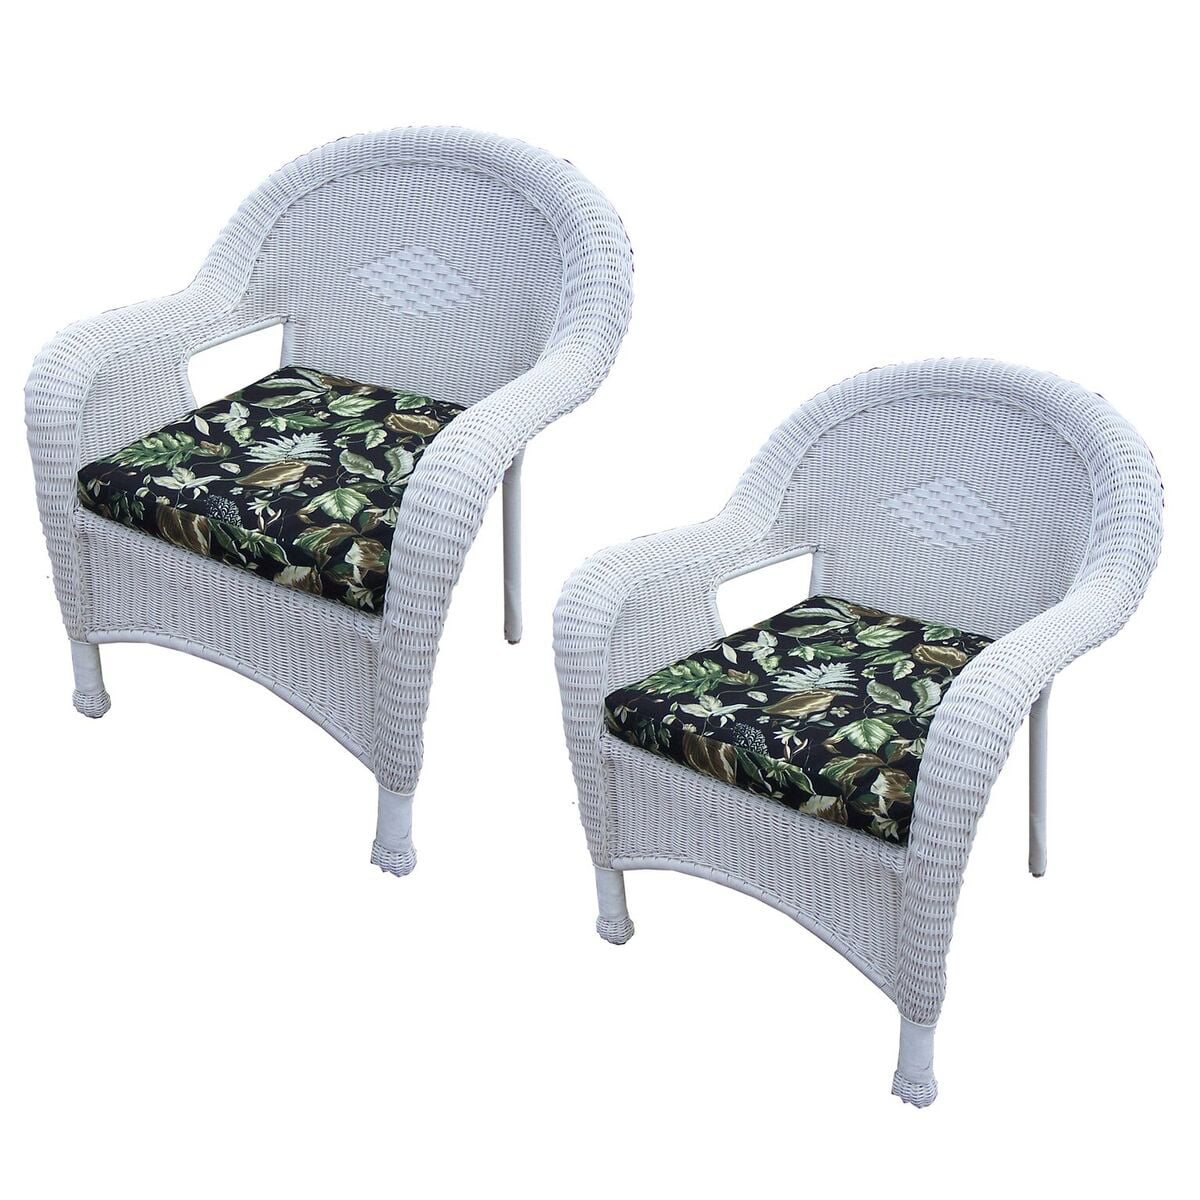 Pack of 2 Bright White Stylish Outdoor Patio Resin Wicker